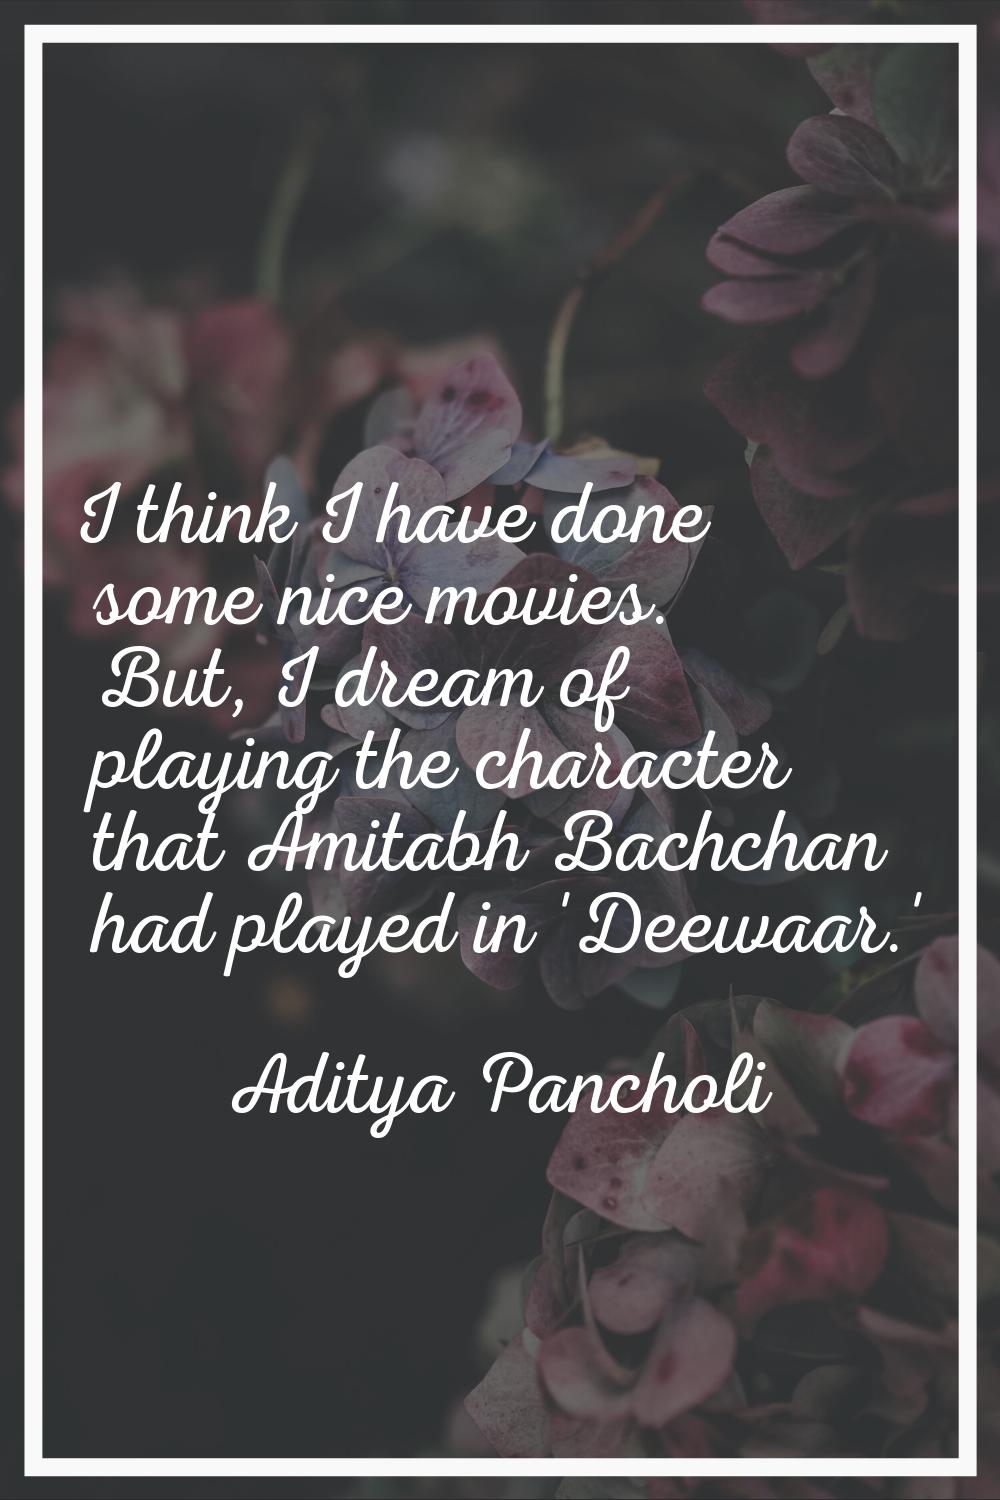 I think I have done some nice movies. But, I dream of playing the character that Amitabh Bachchan h